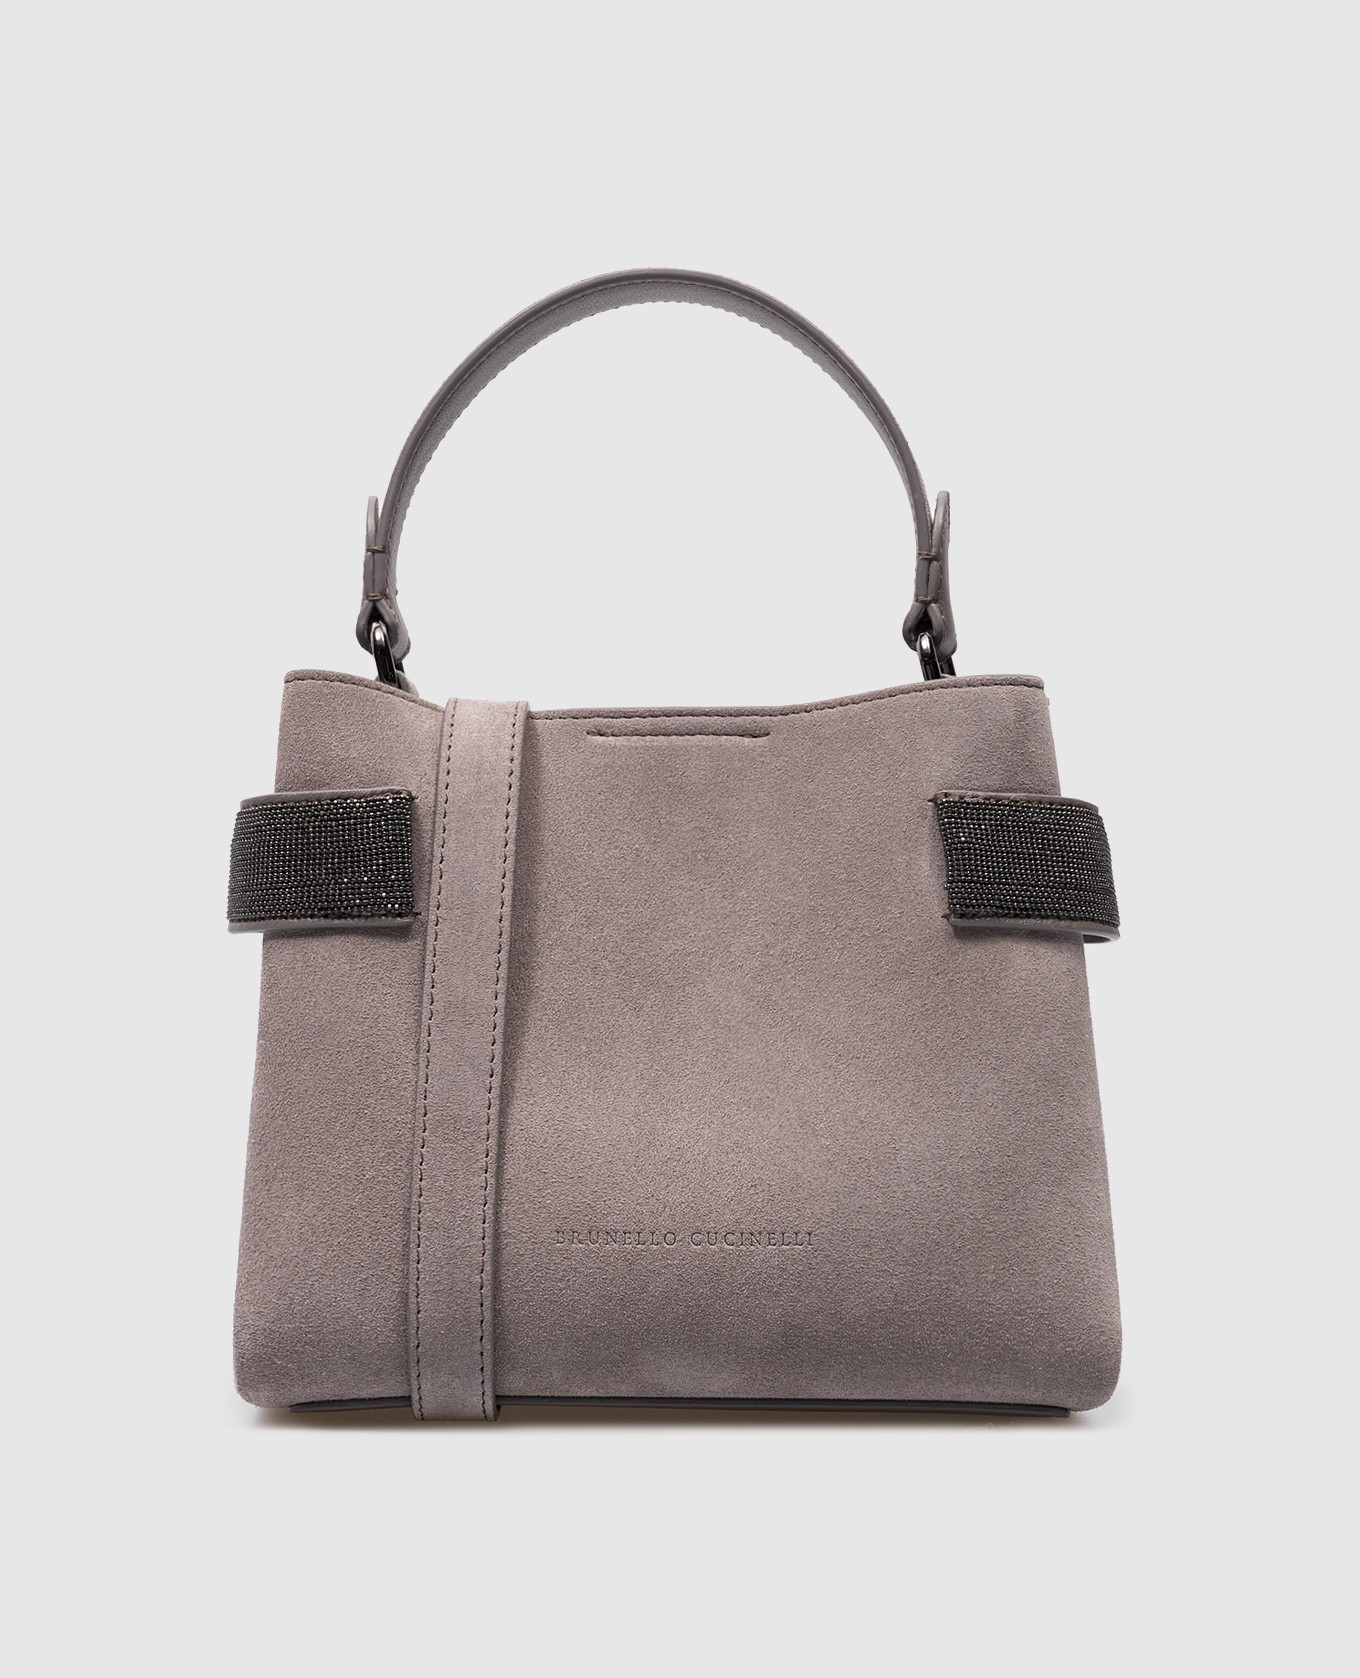 Gray suede bag with monil chain